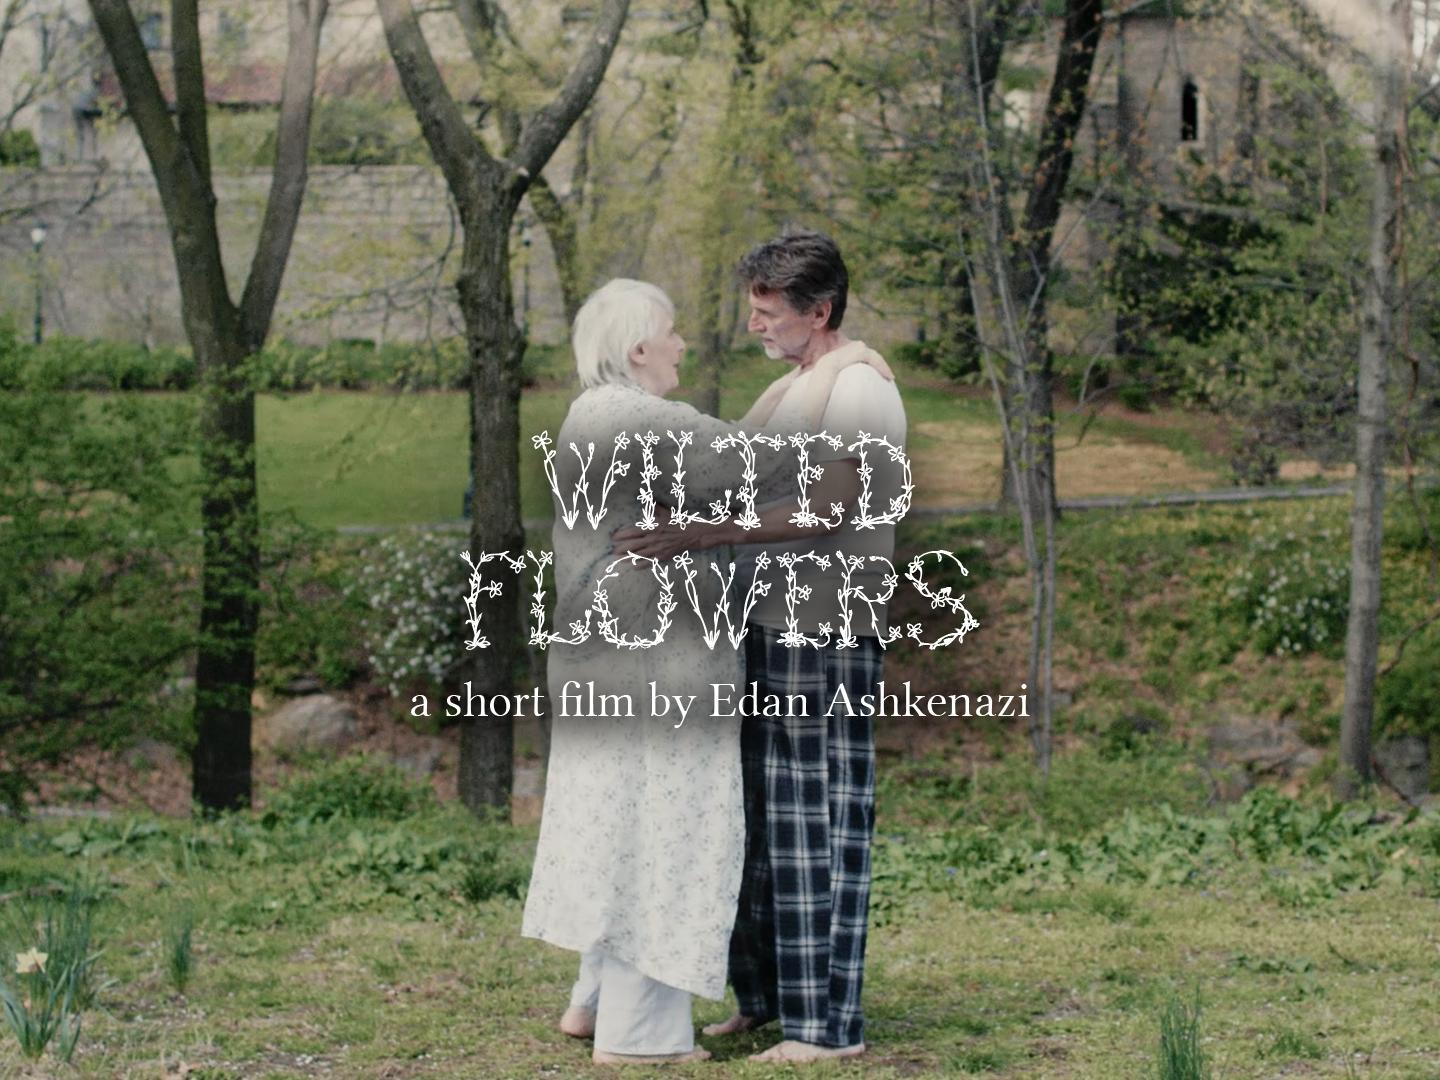 Wilted Flowers (2021)